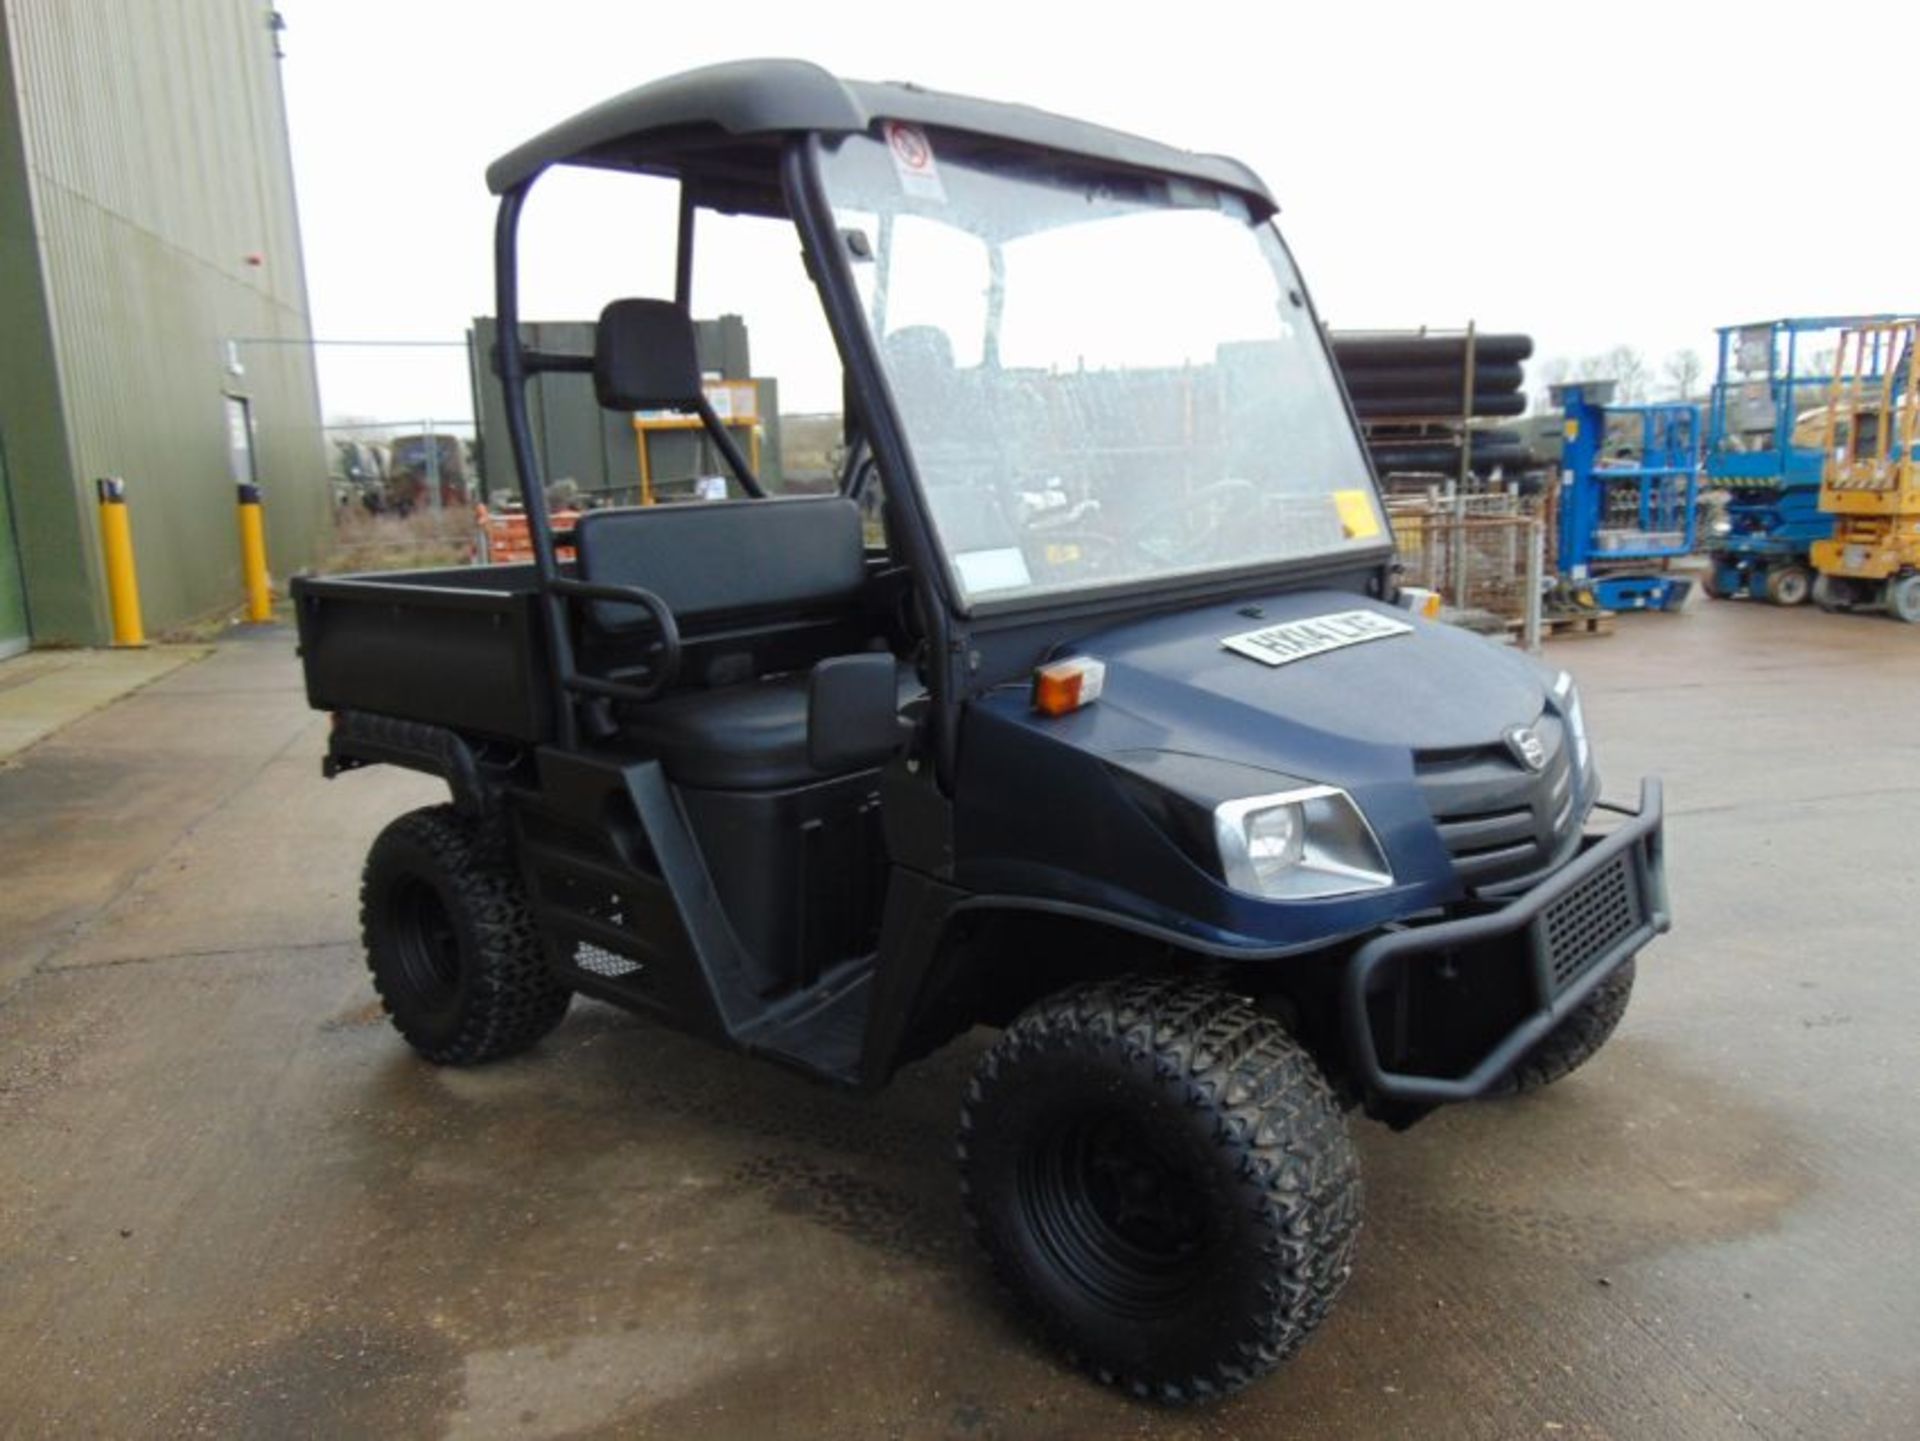 2014 Cushman XD1600 4x4 Diesel Utility Vehicle Showing 1104 hrs - Image 4 of 25